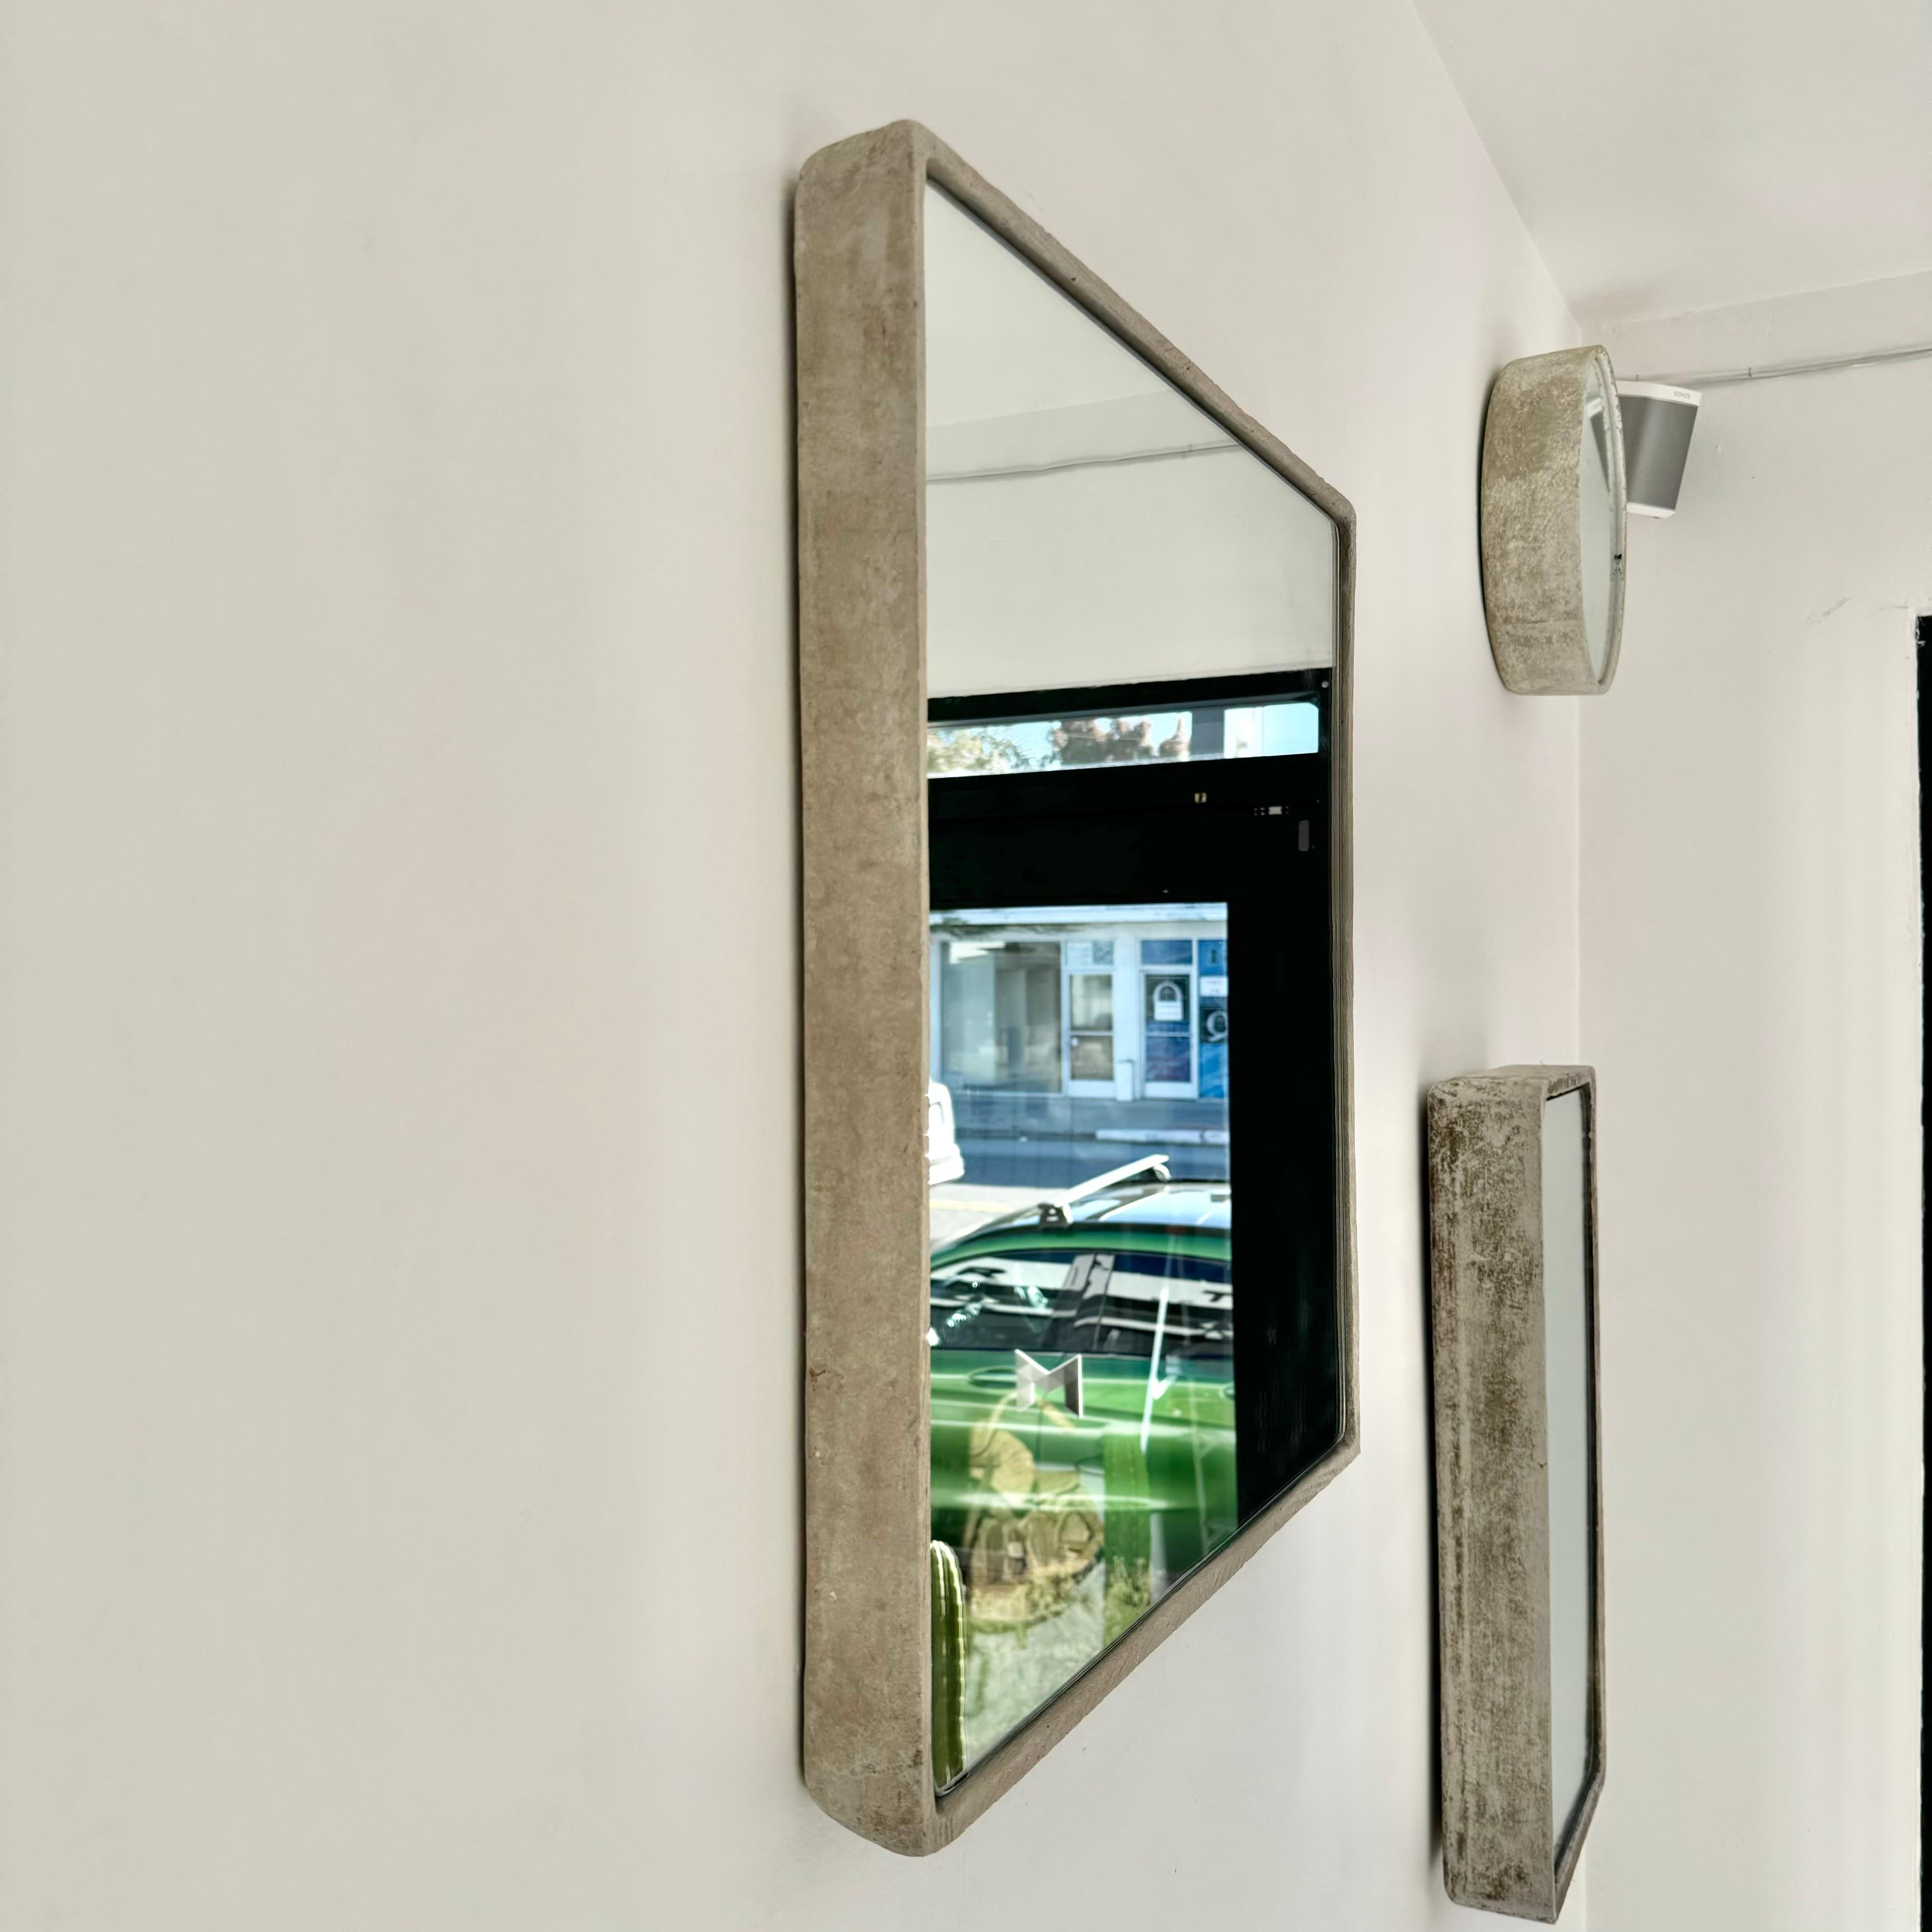 Monumental shallow square Willy Guhl concrete mirror. Substantial concrete vessel originally produced at the Eternit factory in Switzerland in the 1960’s. Custom mirror/glass was professionally hand cut and added recently. Beautiful light patina